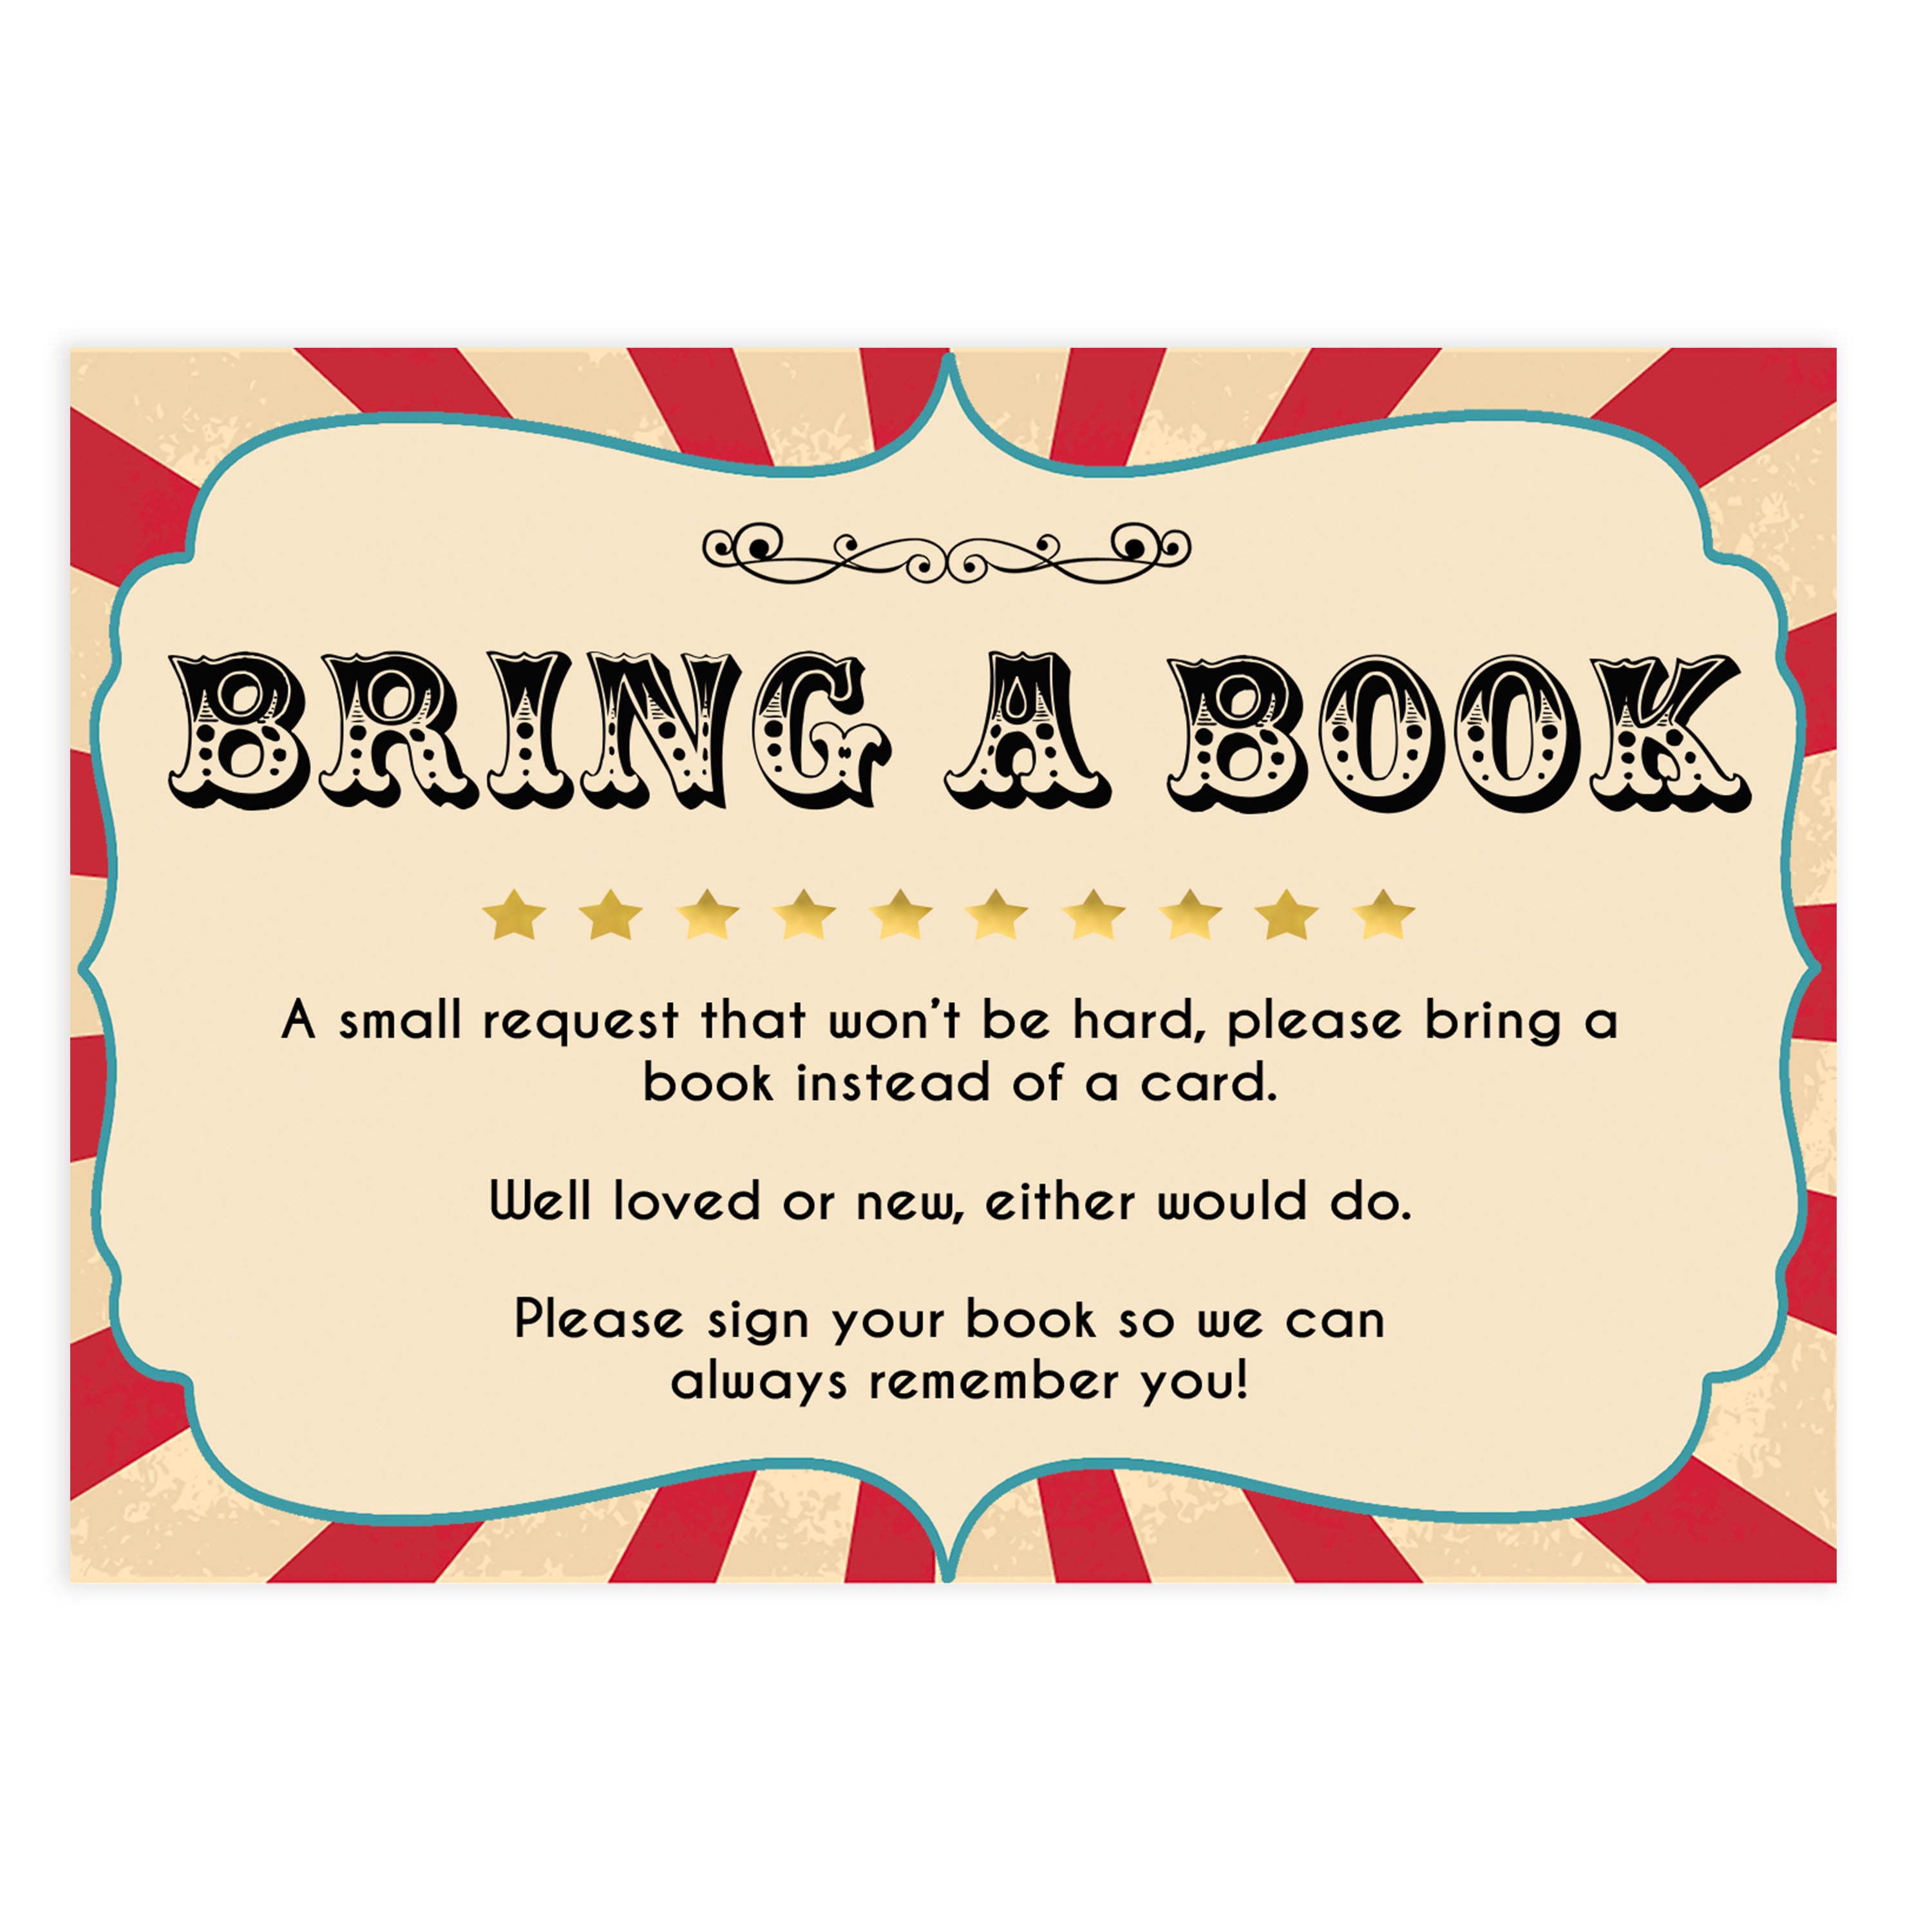 bring a book baby game, books for baby insert, Printable baby shower games, circus fun baby games, baby shower games, fun baby shower ideas, top baby shower ideas, carnival baby shower, circus baby shower ideas